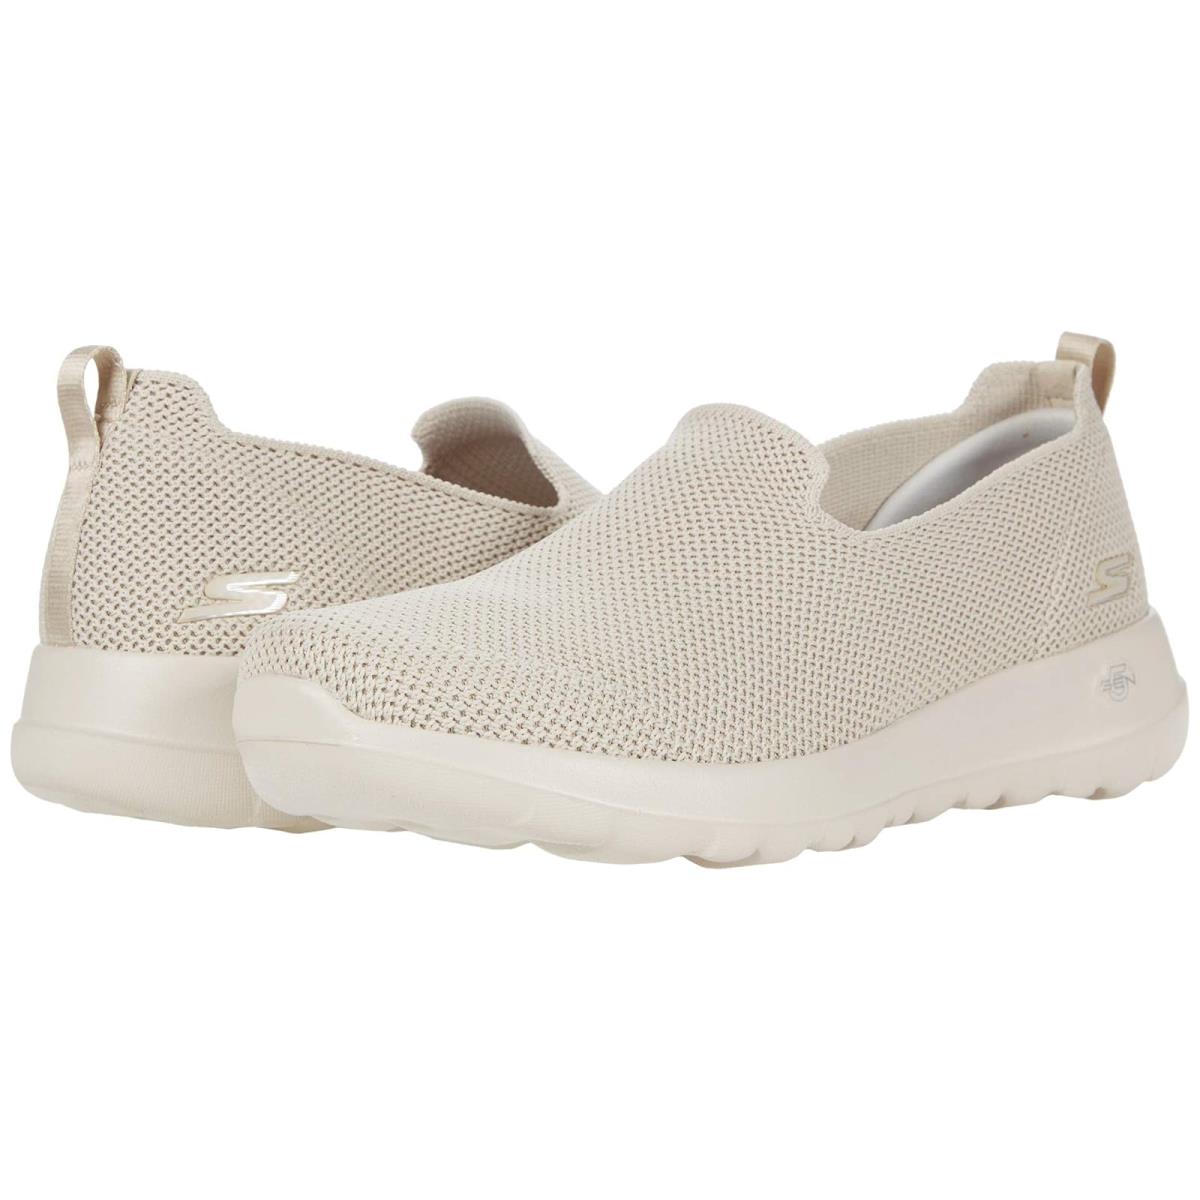 Woman`s Shoes Skechers Performance Go Walk Joy Stretch Fit Taupe